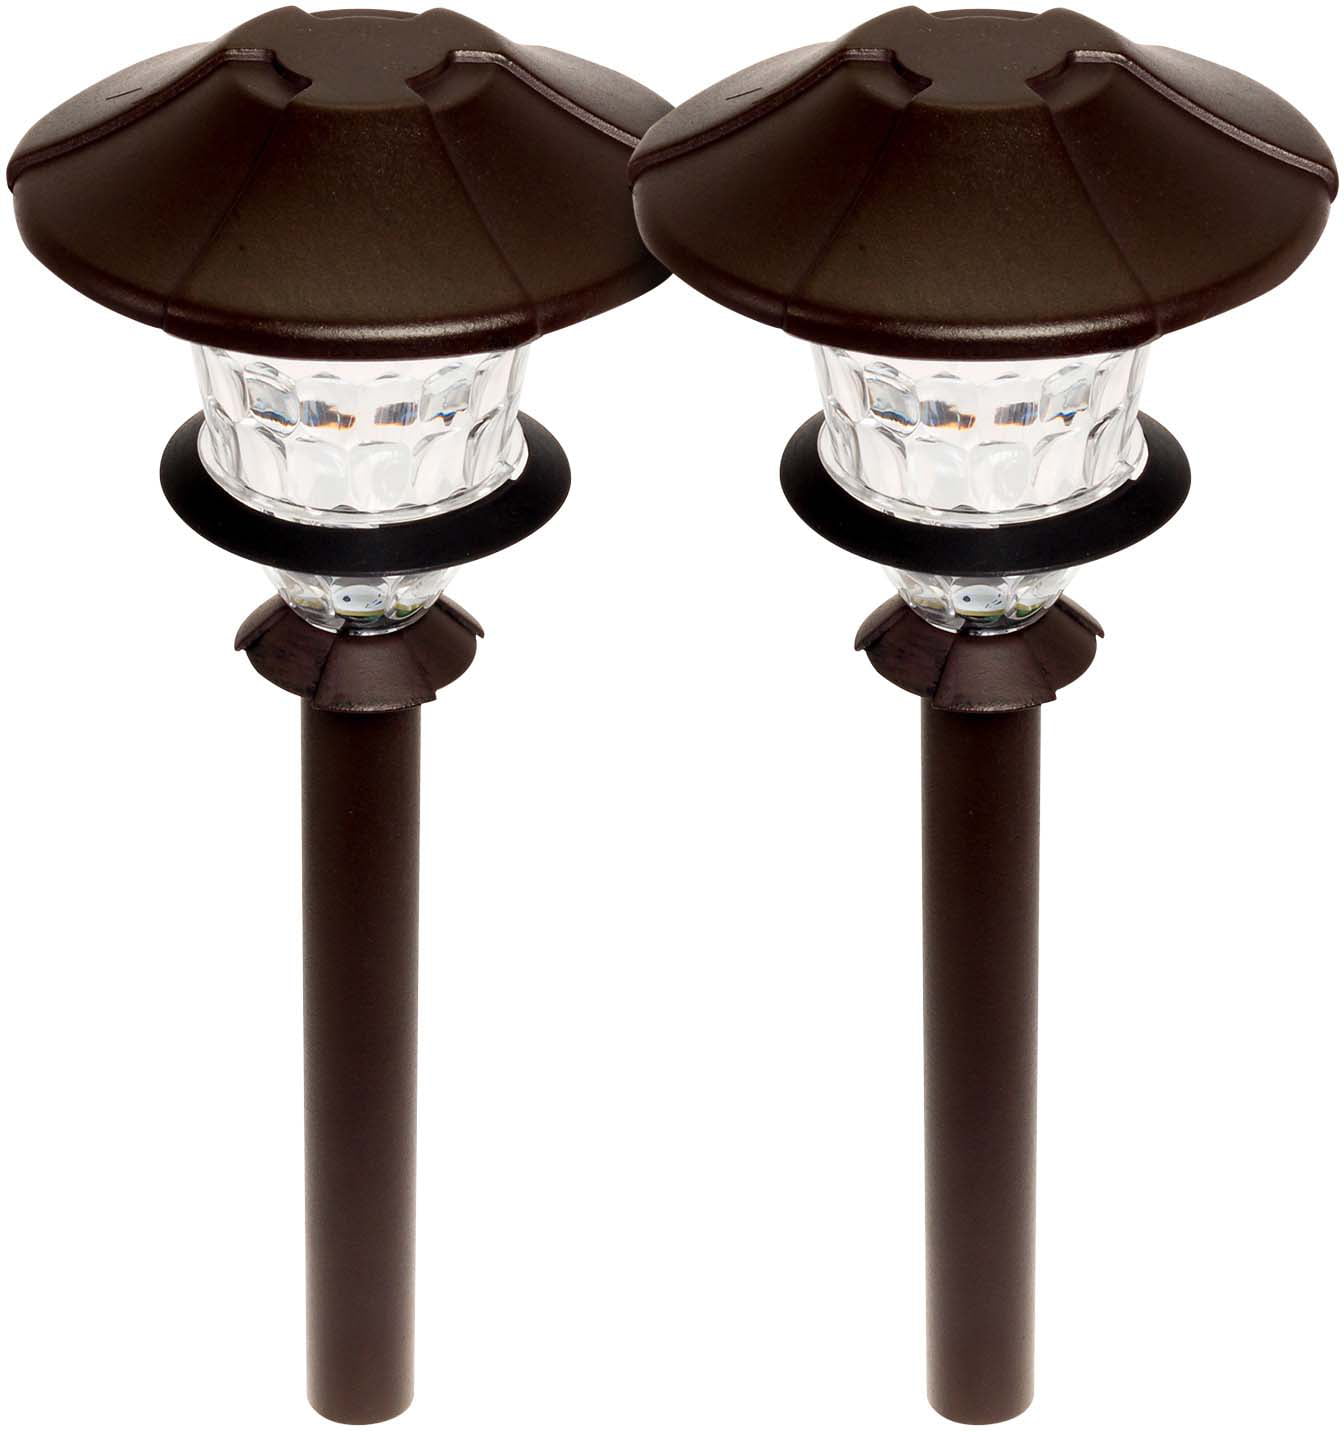 Paradise Gl33869 Low Voltage LED 0.75w Path Light 2 Pack Oil Rubbed Bronze for sale online 